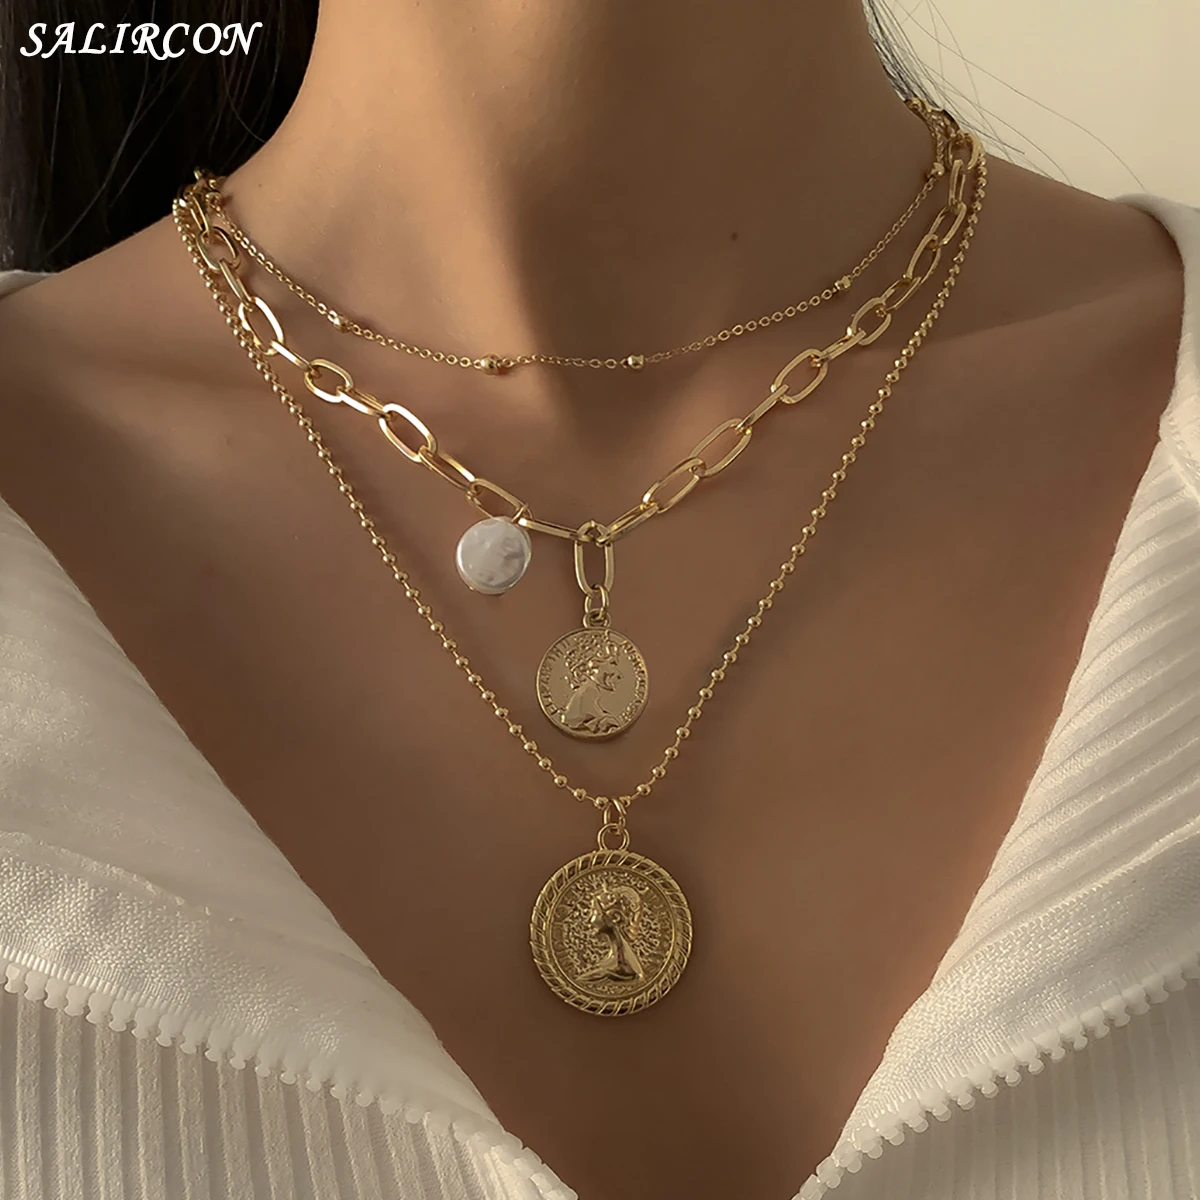 

Vintage Multi Layer Carved Coin Portrait Pendant Necklace for Women Kpop Baroque Pearl Beads Chain Necklace Fashion Jewelry 2021